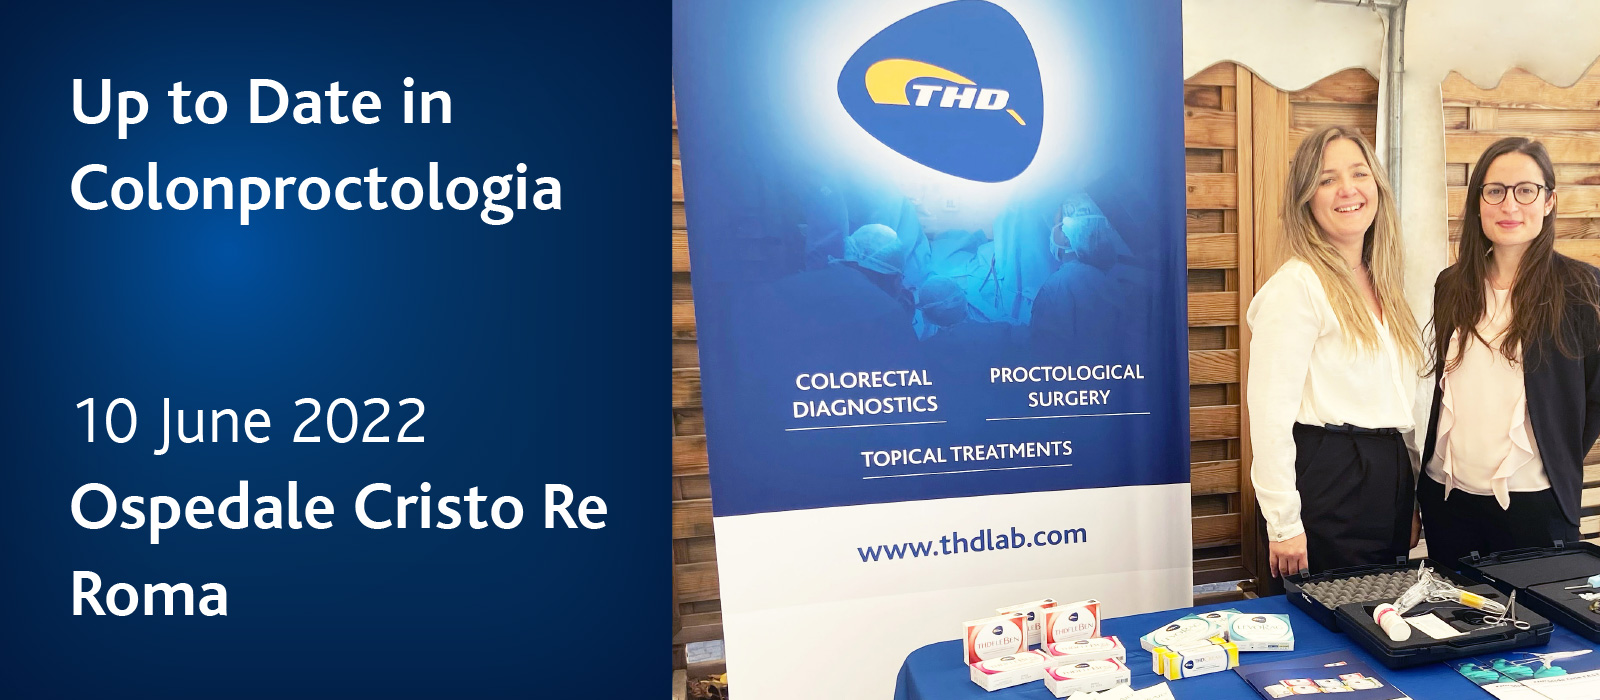 Up to Date Coloproctologia